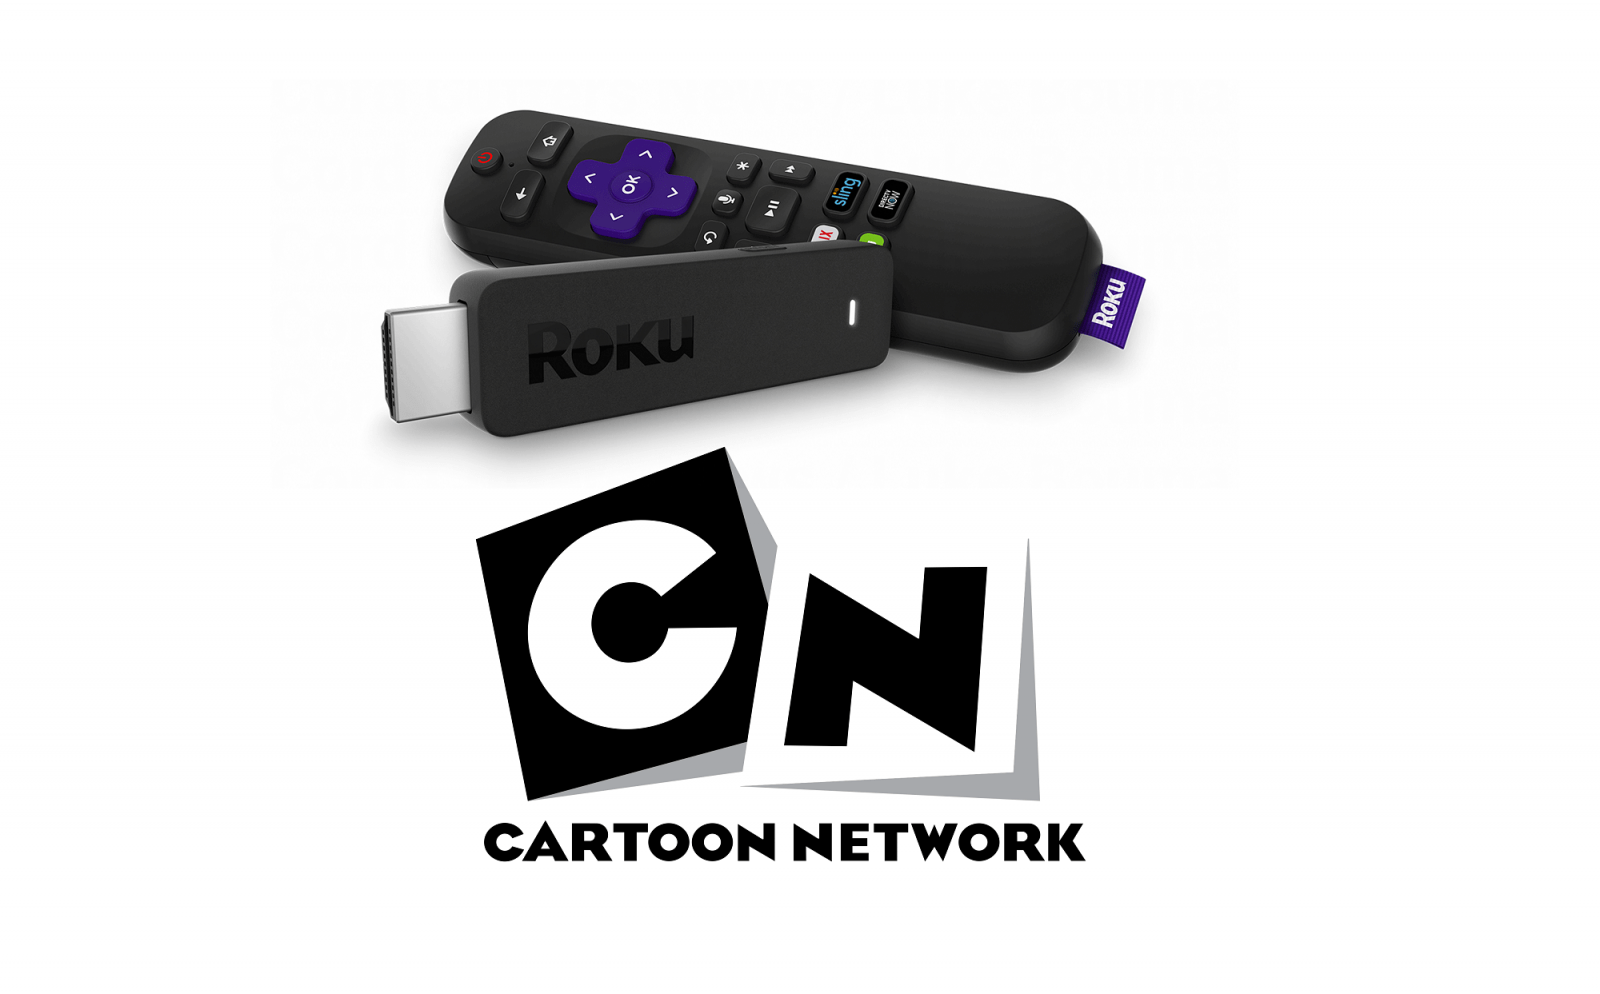 How to Activate and Watch Cartoon Network on Roku [In 2 Ways]